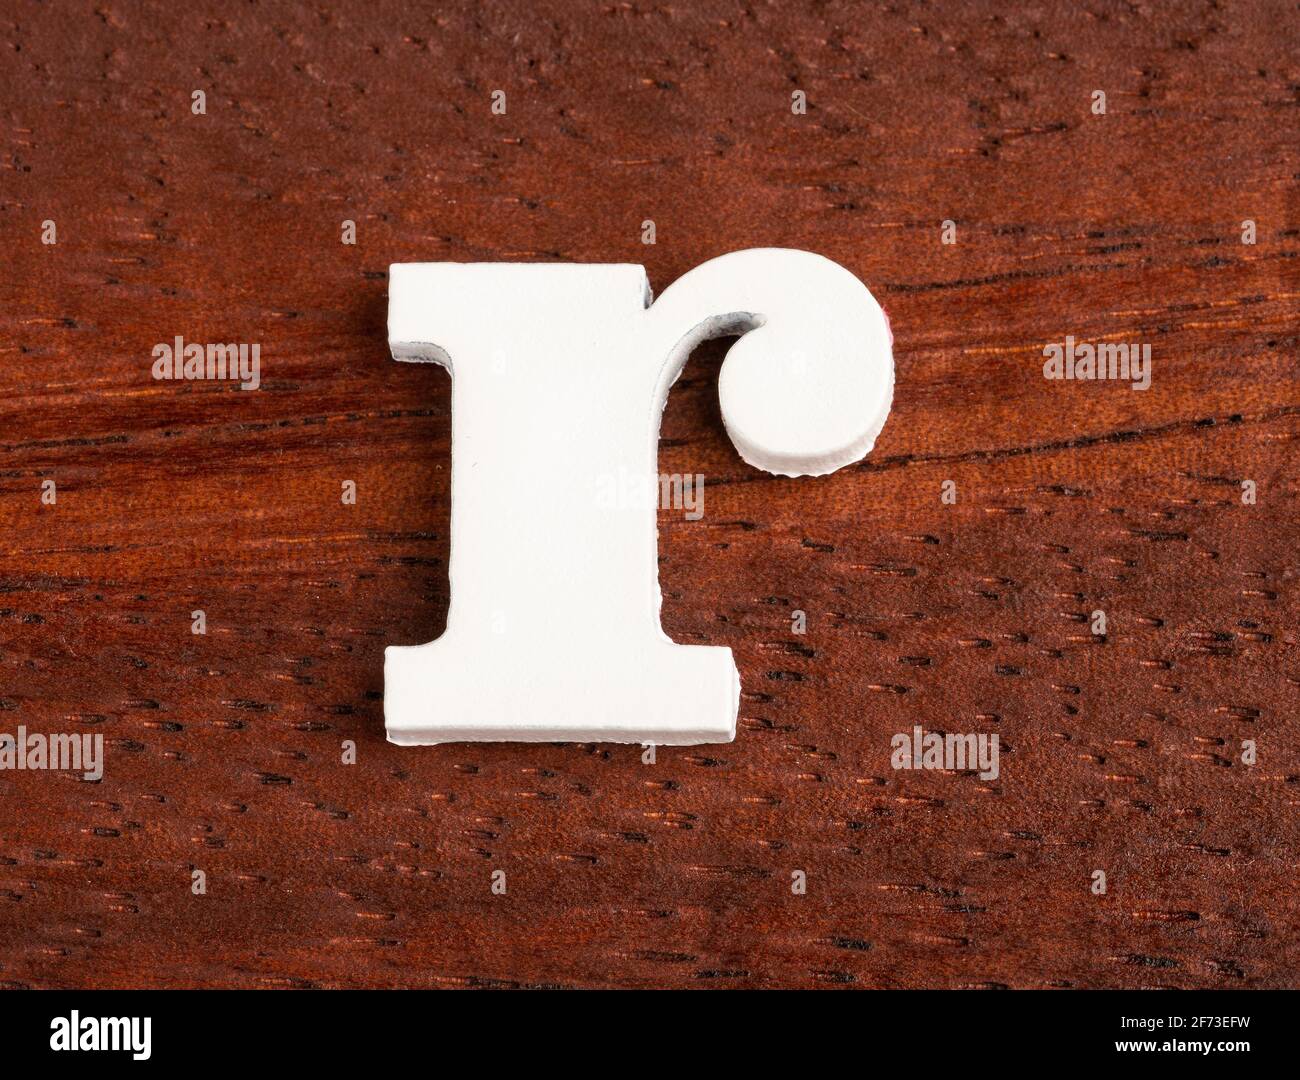 r - lowercase letter. Piece in wood Stock Photo